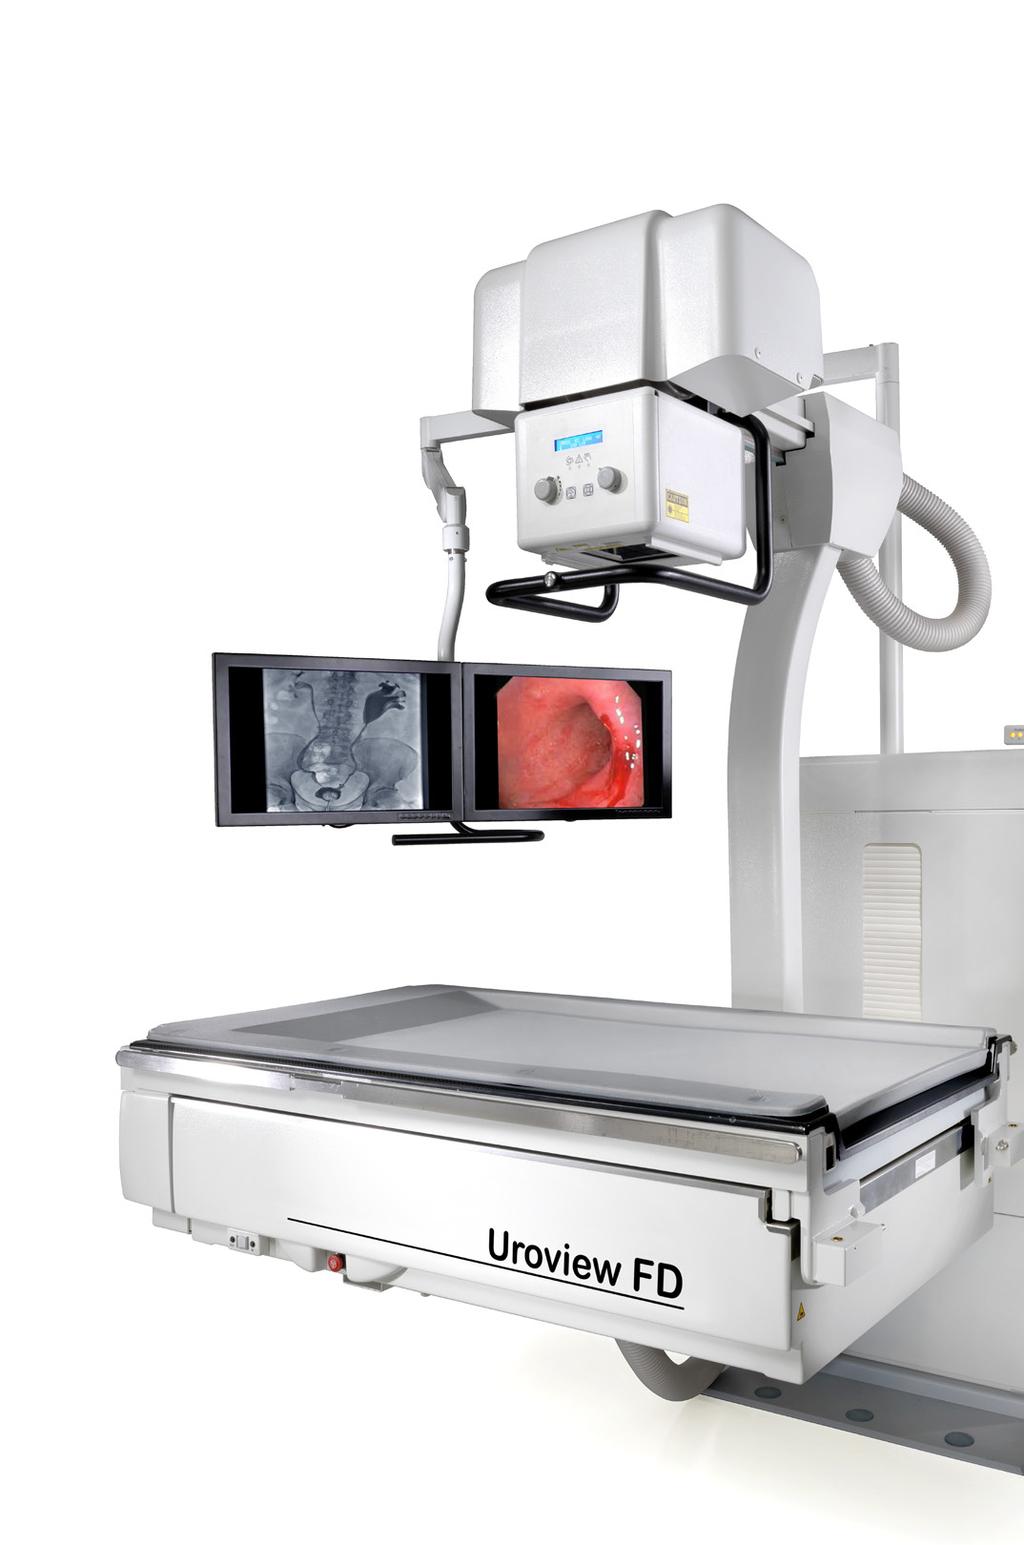 Precisely Your View Uroview FD Digital Imaging Suite for Urology Authorized Distributor GE OEC